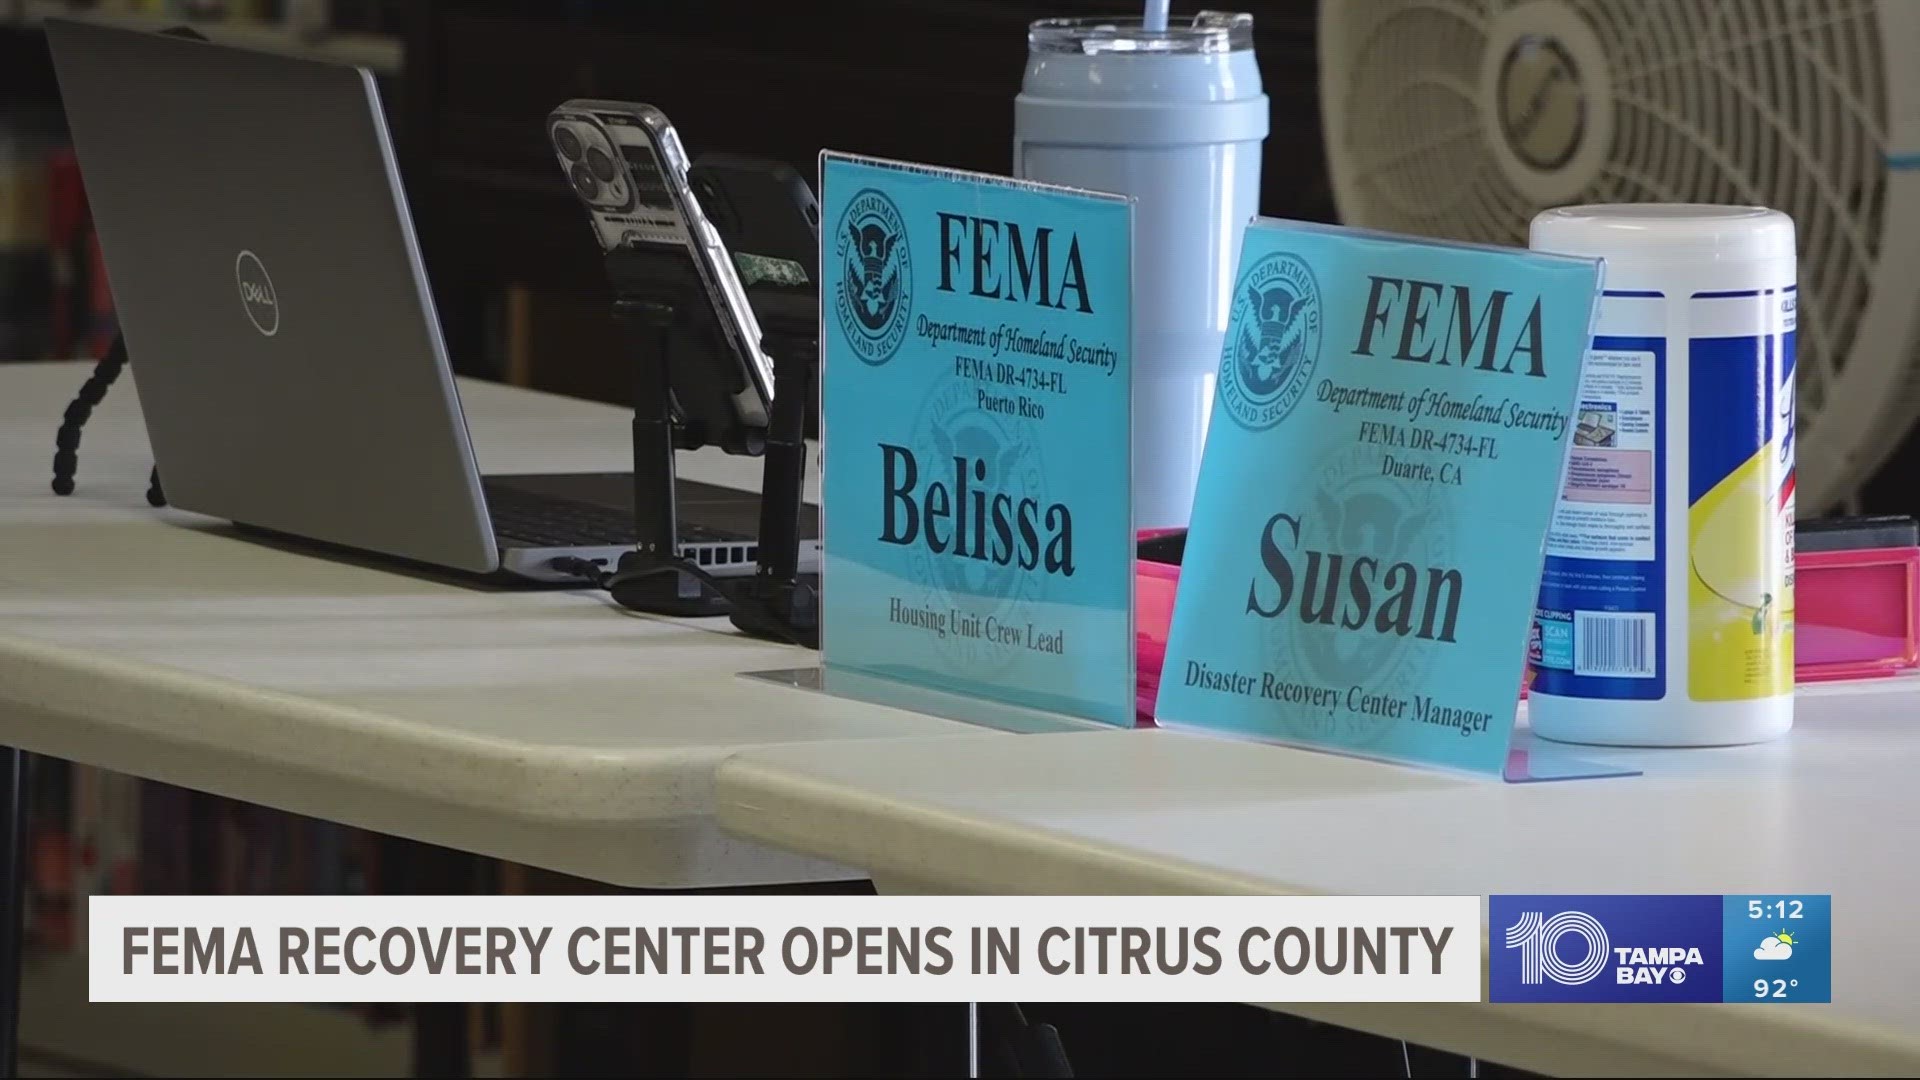 Many people in Citrus County are grateful that FEMA is on the ground.